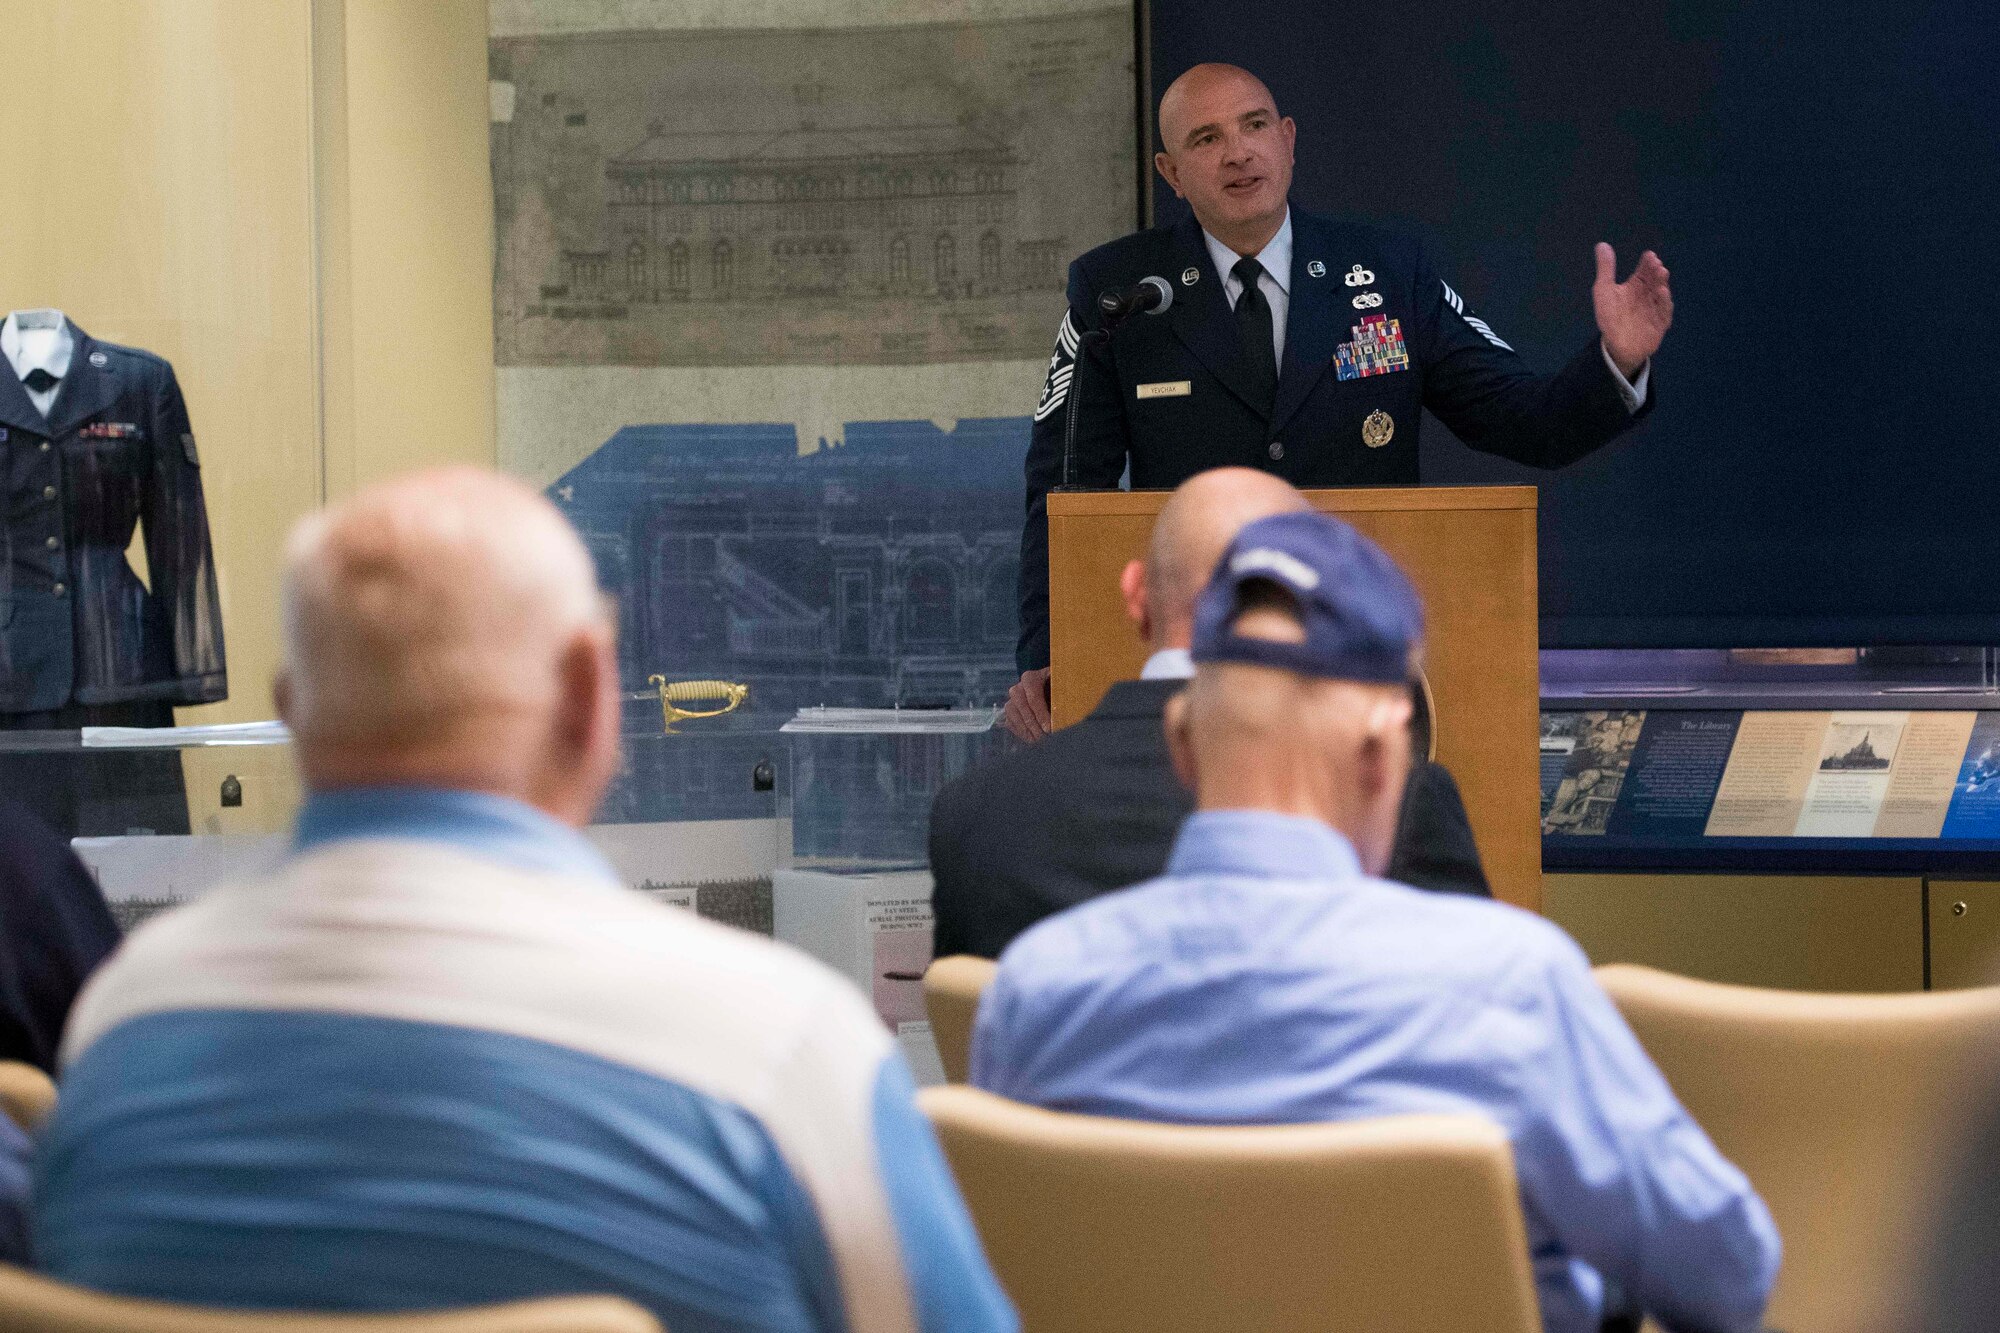 Chief Master Sgt. Christopher M. Yevchak, Air Force District of Washington command chief, speaks at the Armed Forces Retirement Home in Washington D.C., Sept. 13, 2019. Yevchak was the guest speaker for the AFRH's 72nd Air Force birthday celebration for residents and AFDW Airmen. (U.S. Air Force photo by Master Sgt. Michael B. Keller)